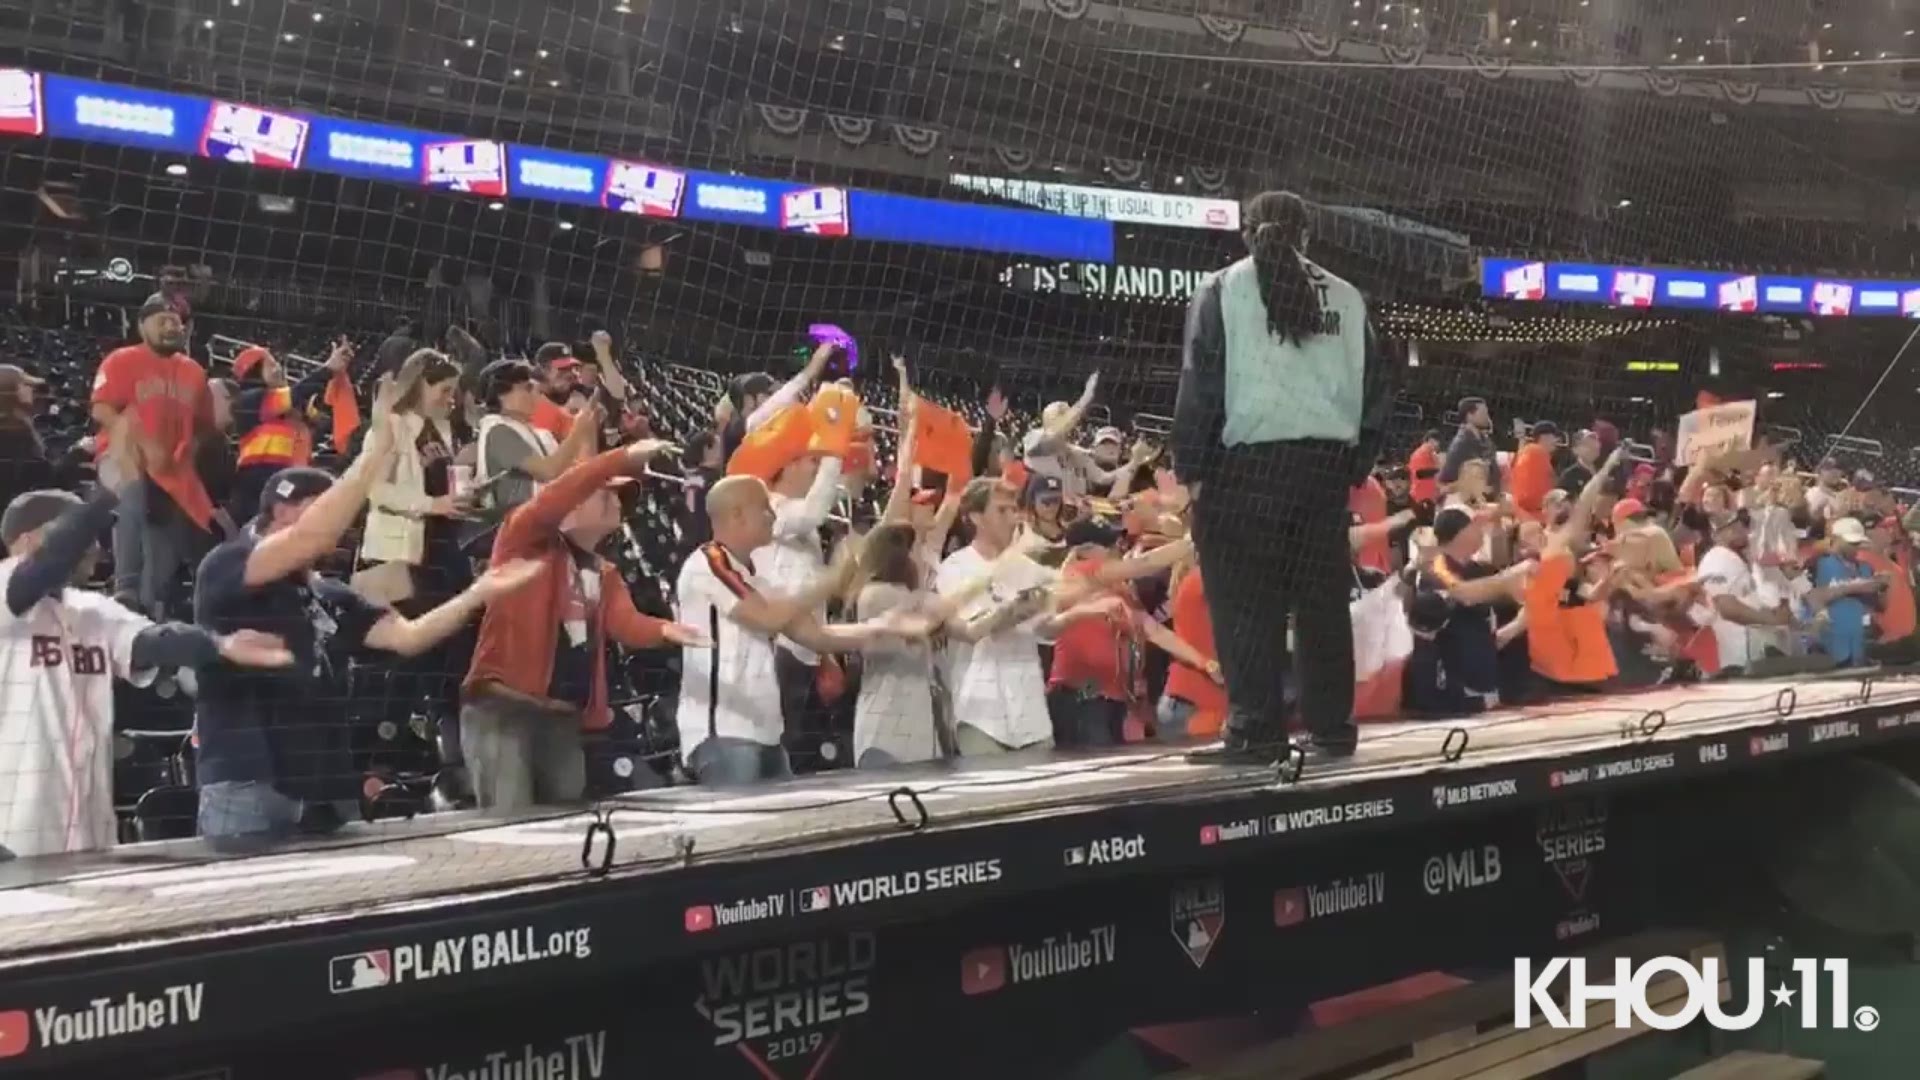 Fans celebrated the Astros Game 5 win in the world Series by singing their own version of Baby Shark.